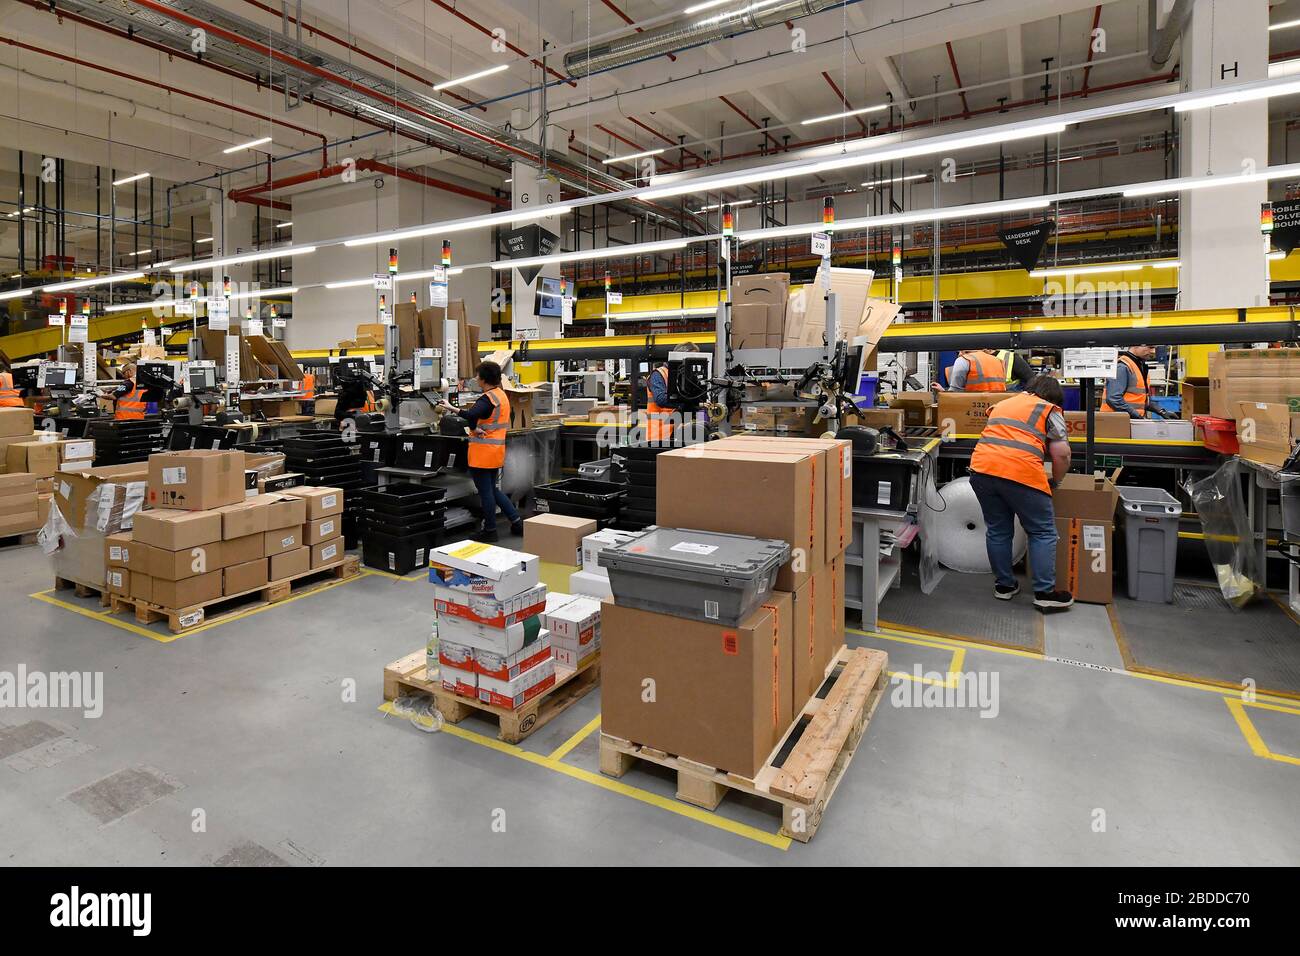 29.01.2020, Moenchengladbach, North Rhine-Westphalia, Germany - Amazon logistics center in Moenchengaldbach. The location is the newest logistics cent Stock Photo